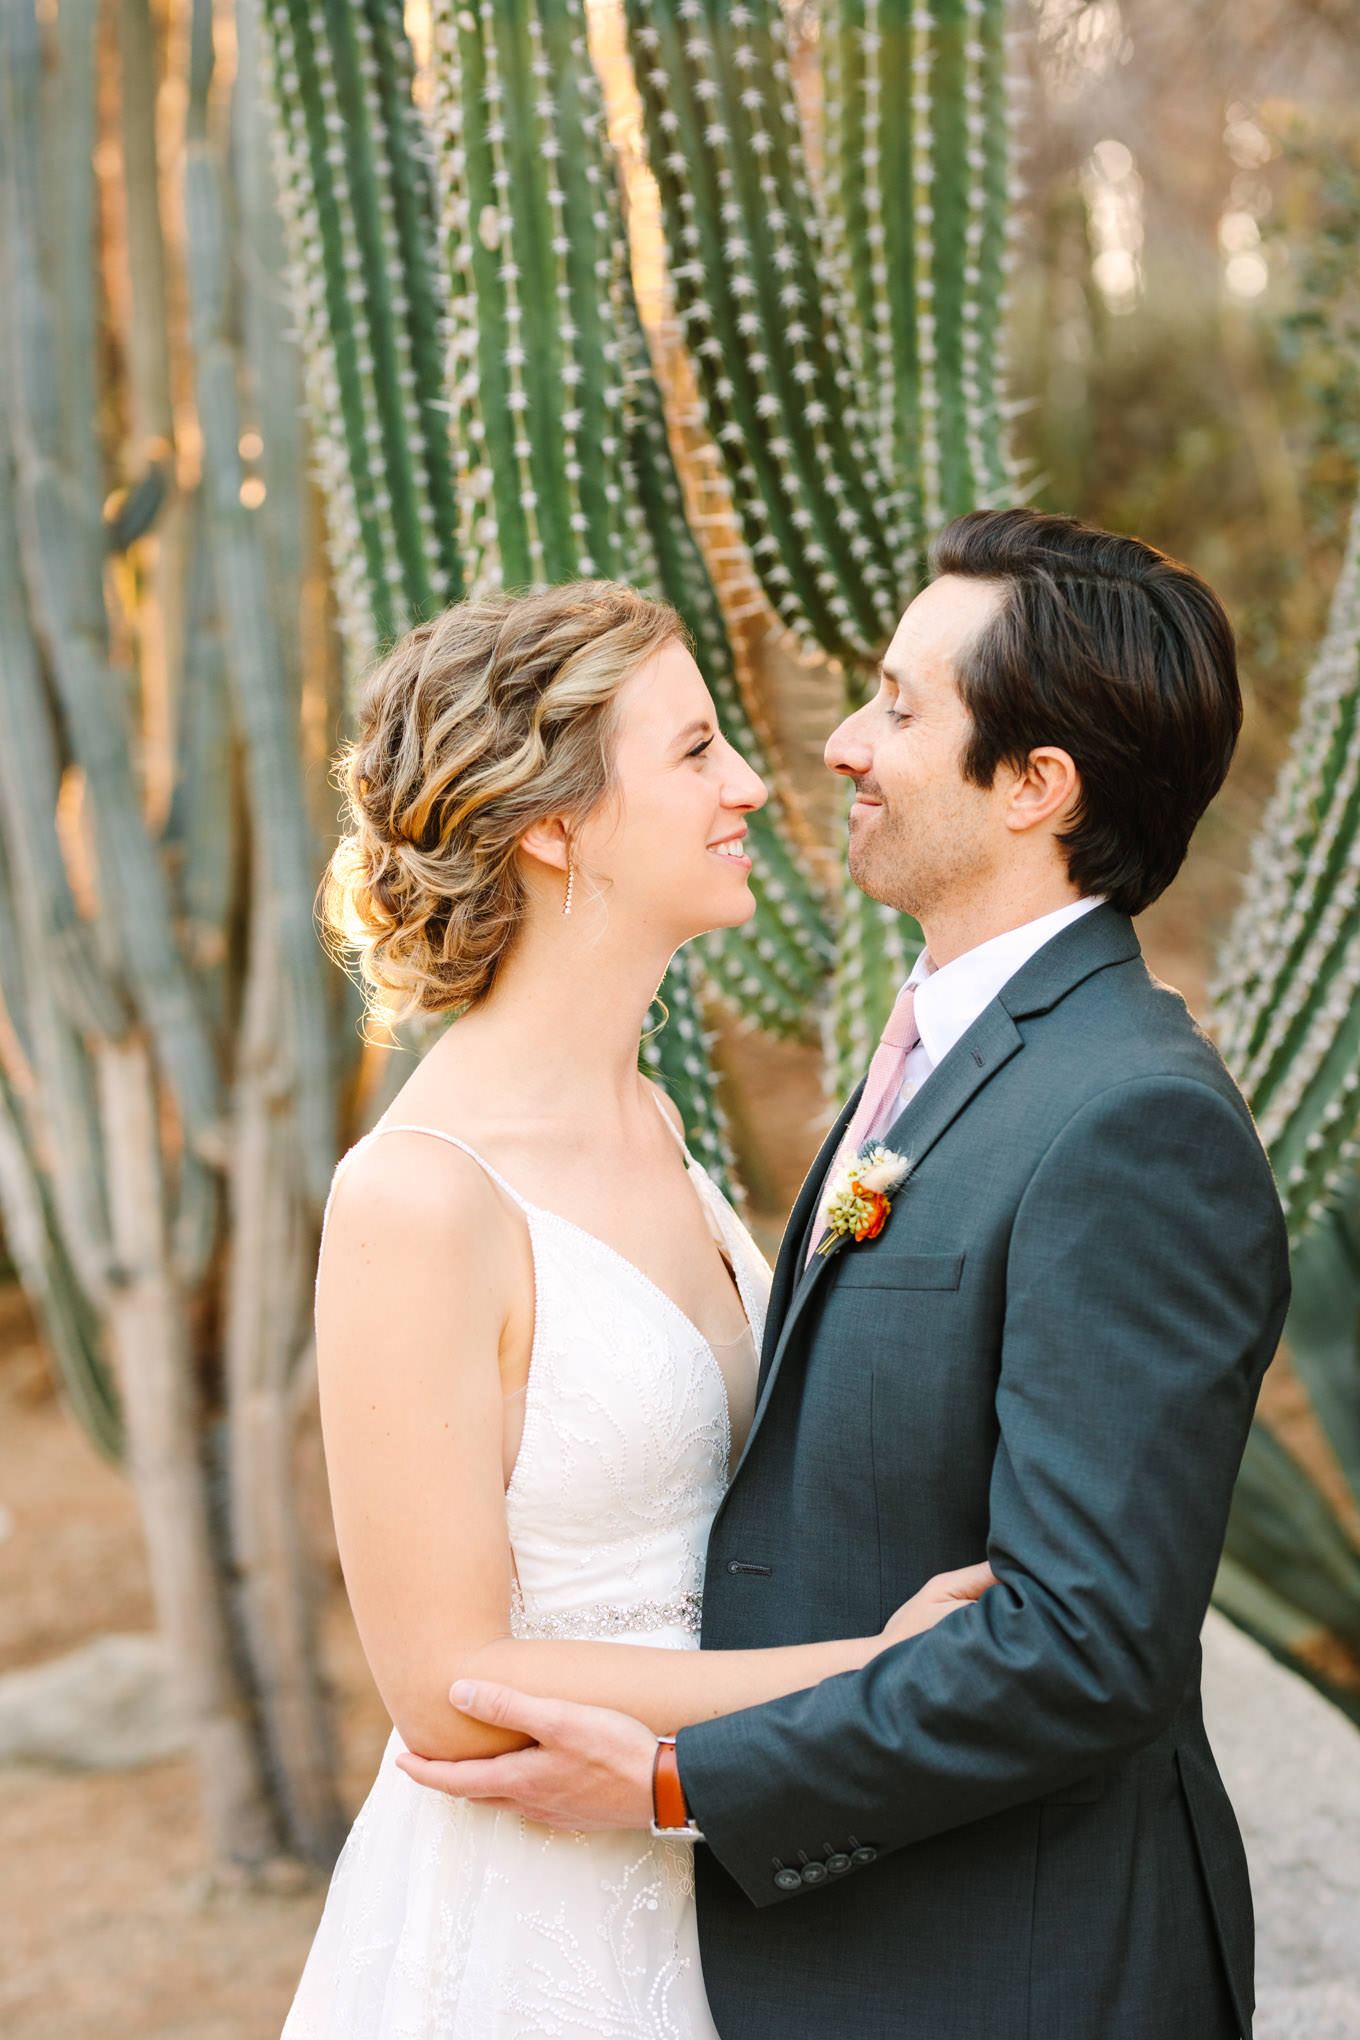 Bride and groom in cactus garden | Living Desert Zoo & Gardens wedding with unique details | Elevated and colorful wedding photography for fun-loving couples in Southern California |  #PalmSprings #palmspringsphotographer #gardenwedding #palmspringswedding  Source: Mary Costa Photography | Los Angeles wedding photographer 